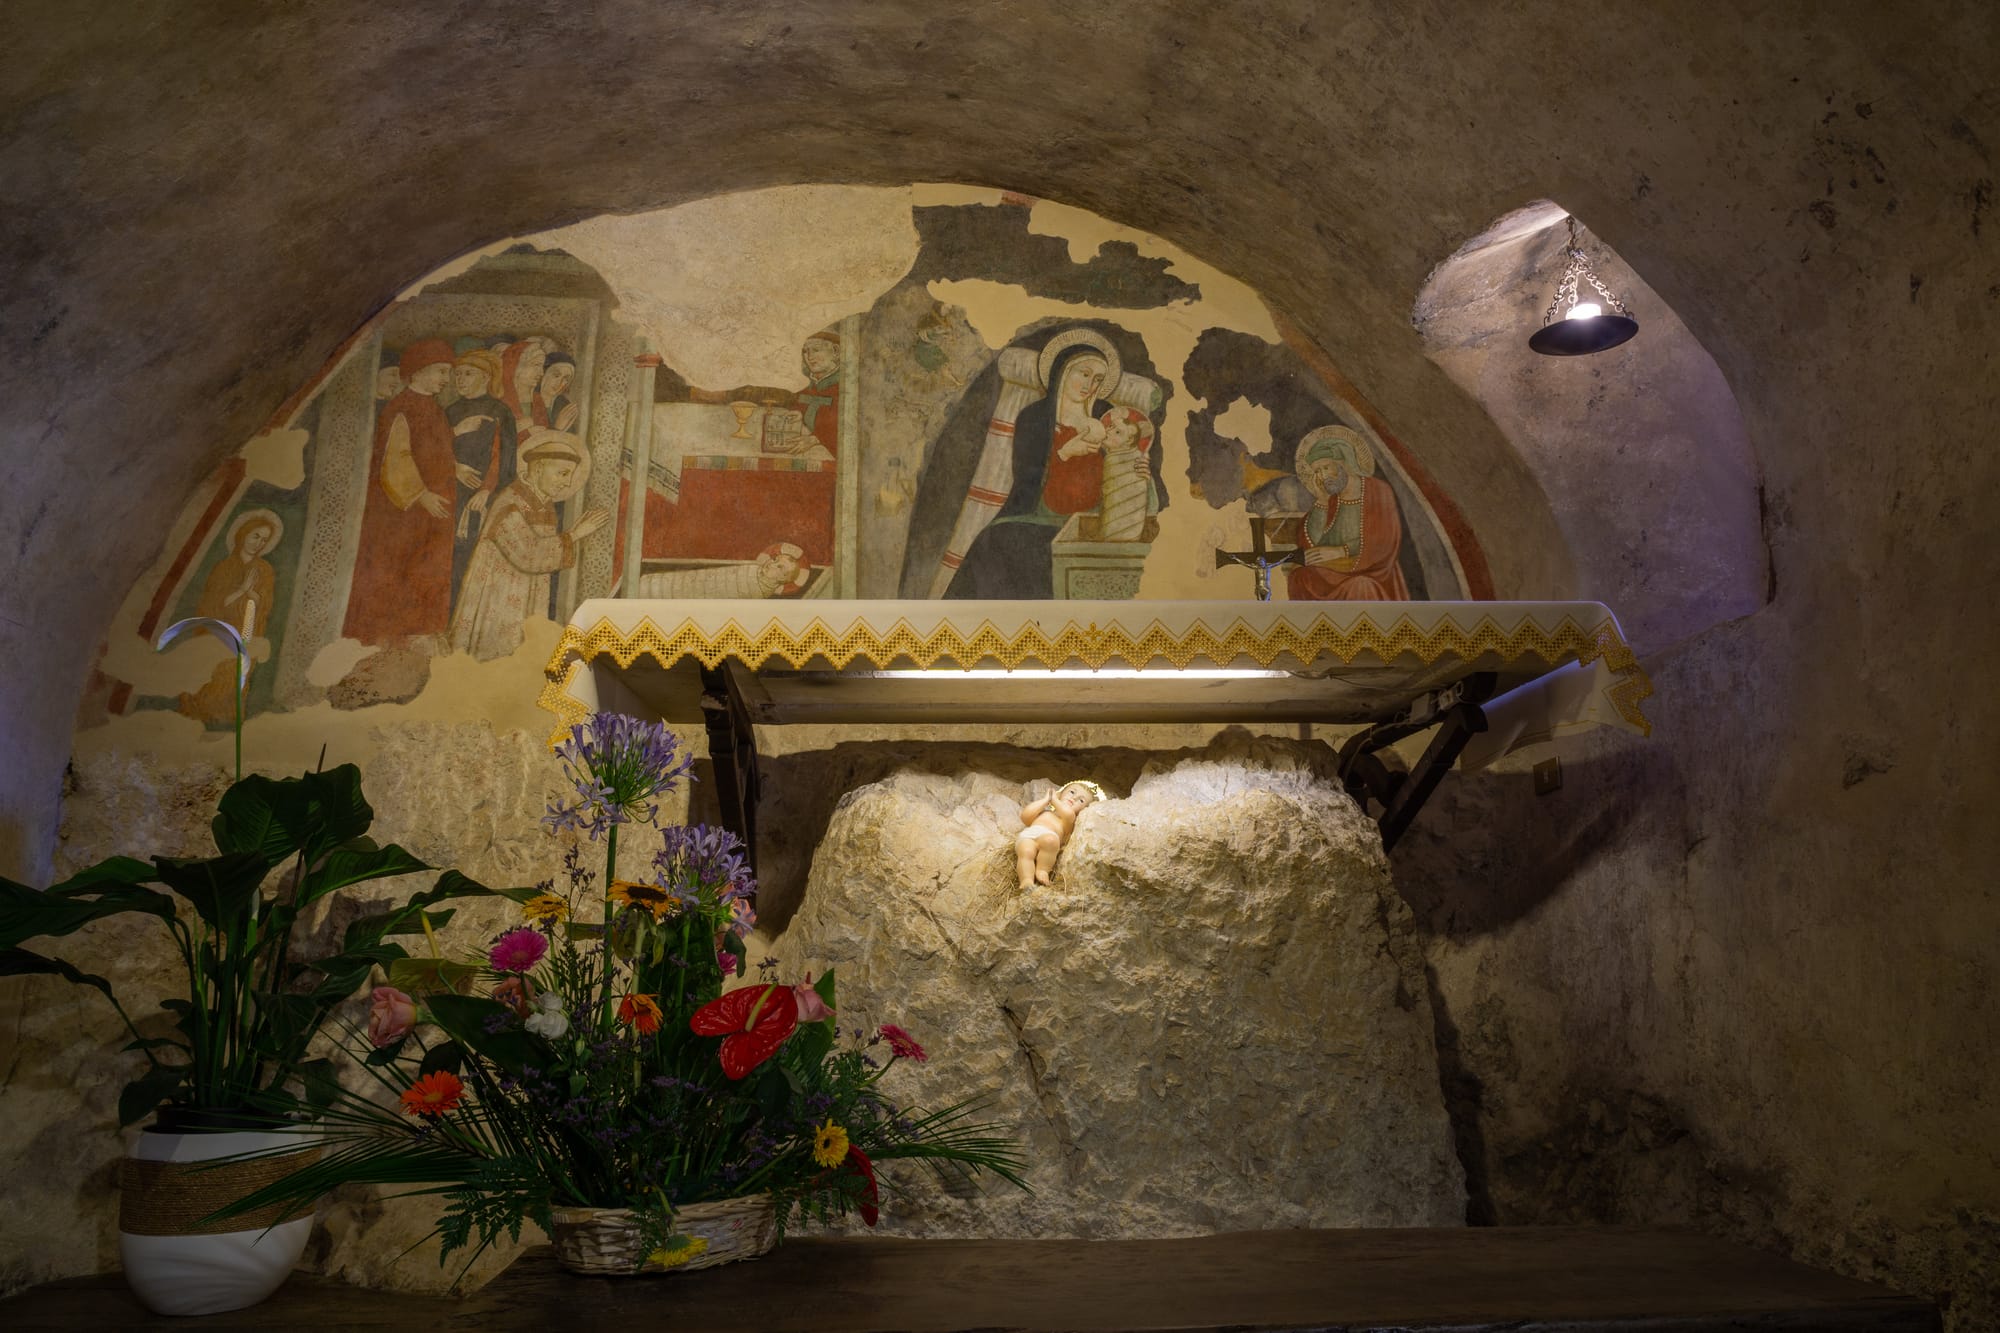 An altar inside the grotto of Greccio with a fresco depicting the first nativity scene from 1223.